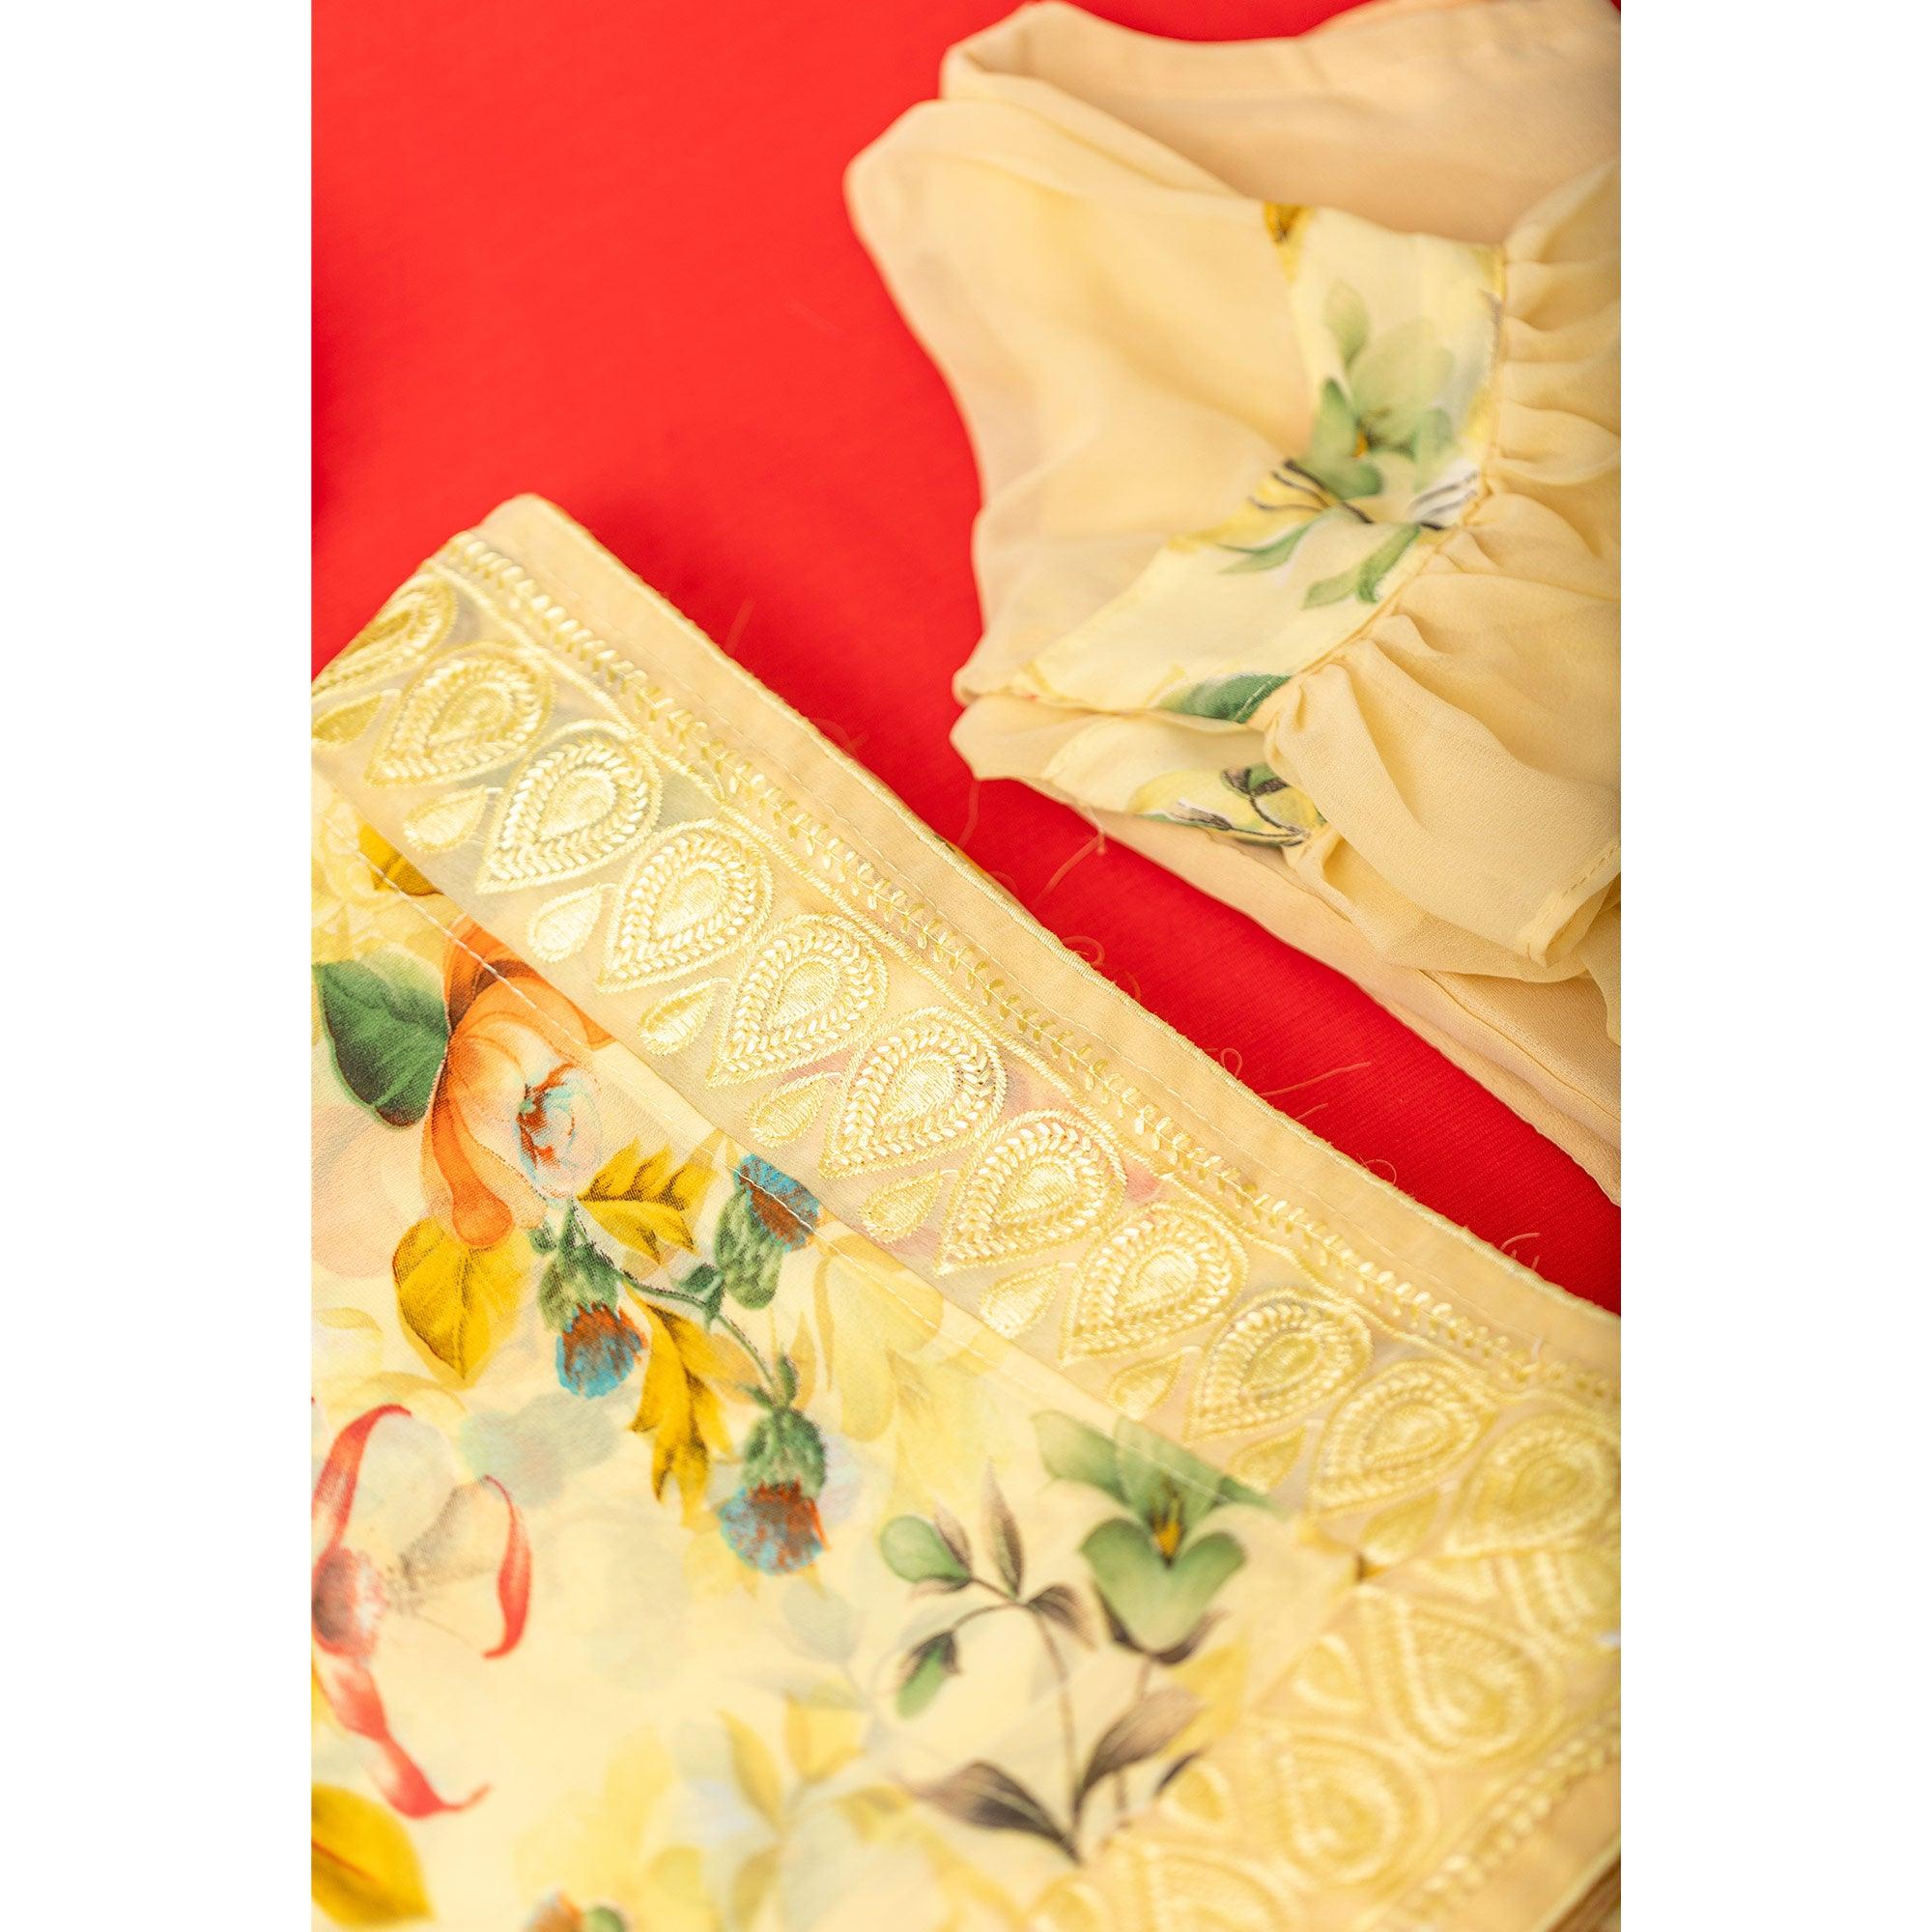 Lemon Green Floral Printed With Embroidered Border Georgette Saree - Peachmode